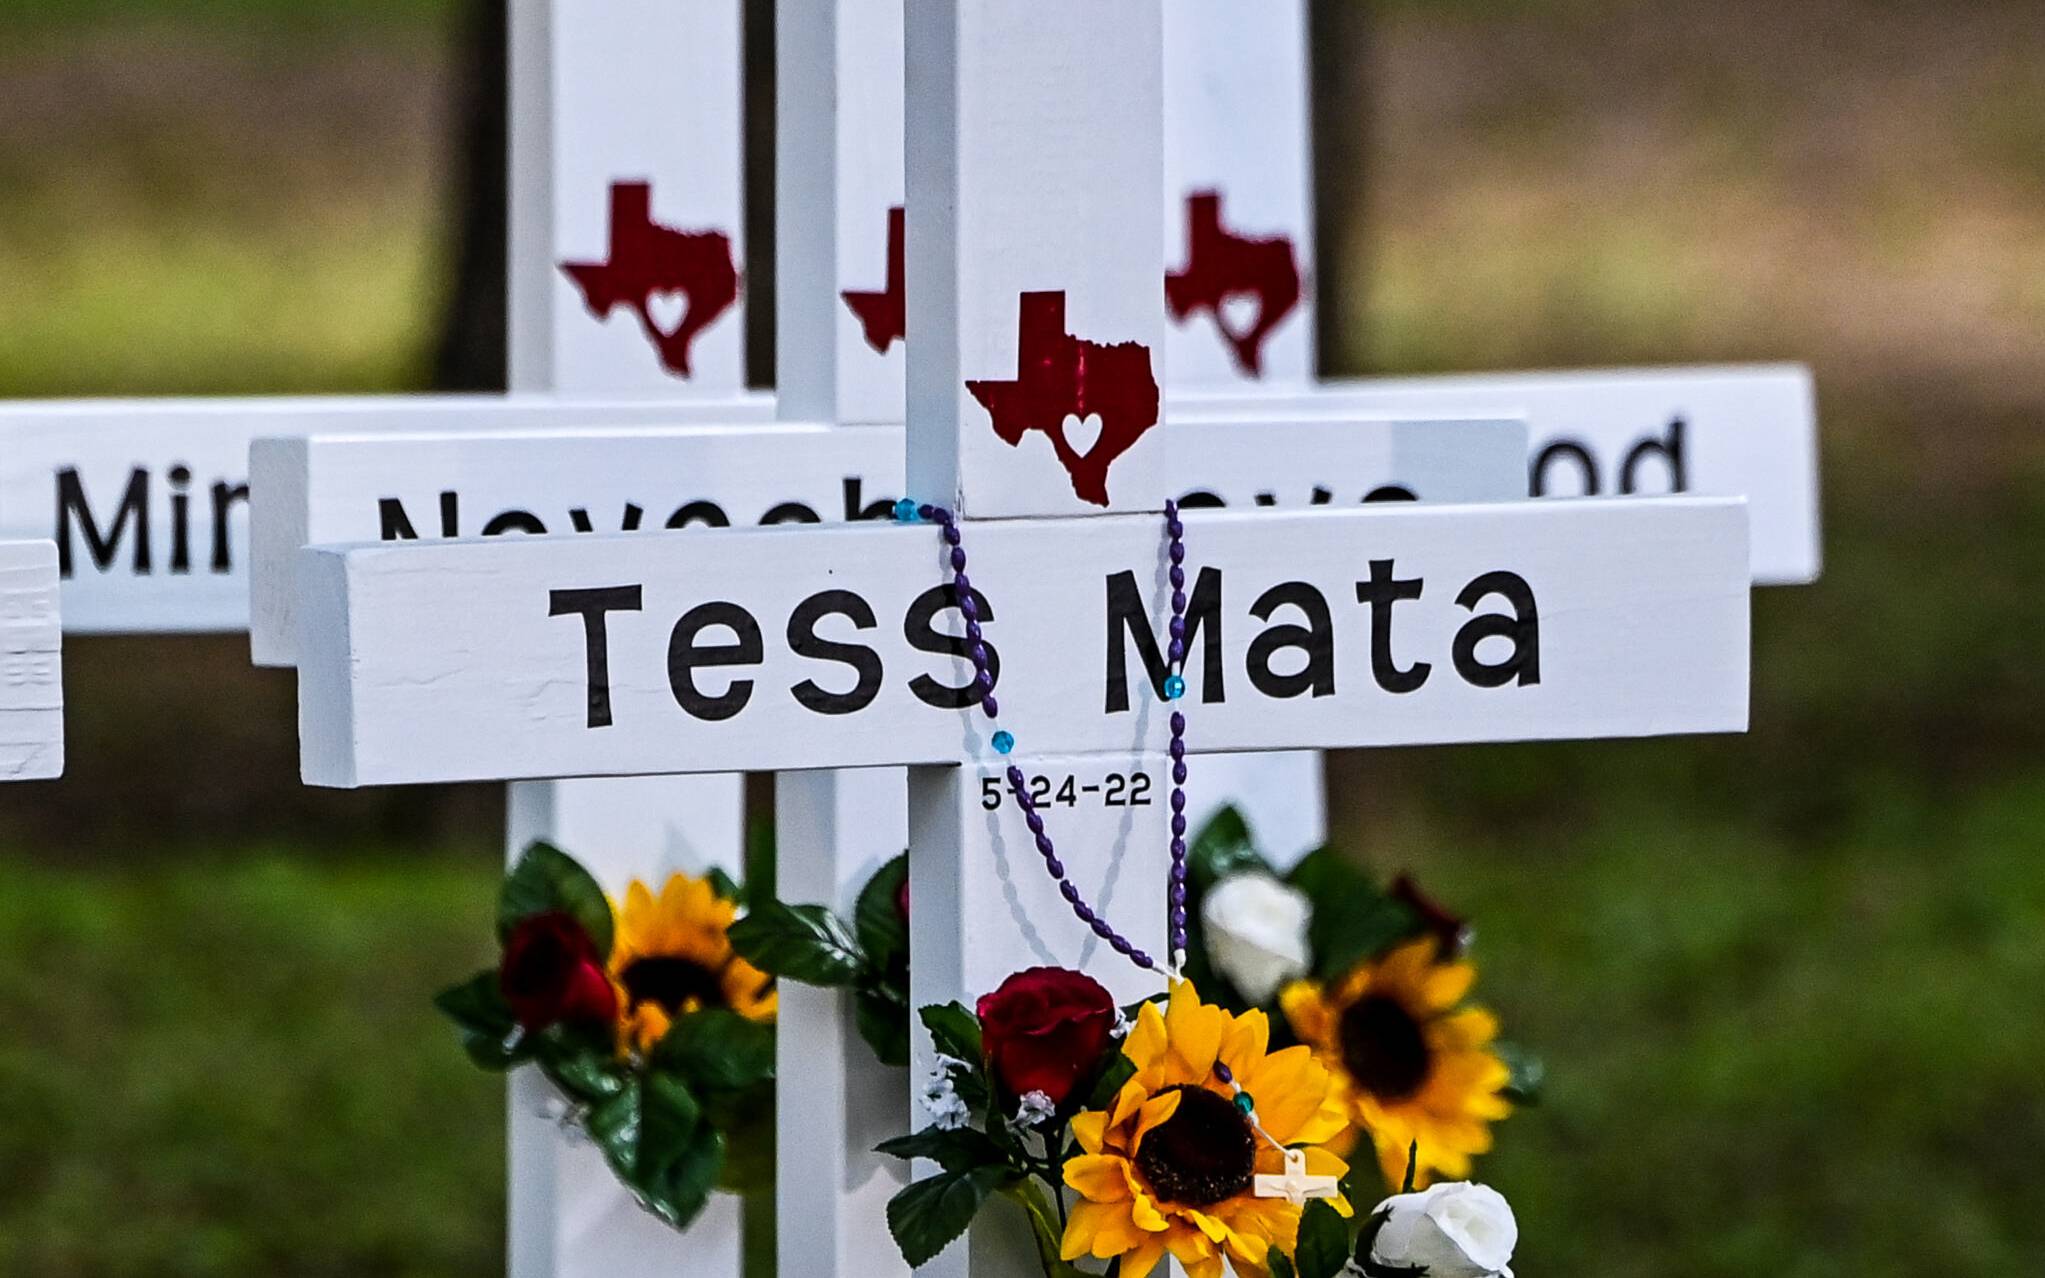 Crosses adorn a makeshift memorial for the shooting victims at Robb Elementary School in Uvalde, Texas, on May 26, 2022. - Grief at the massacre of 19 children at the elementary school in Texas spilled into confrontation on May 25, as angry questions mounted over gun control -- and whether this latest tragedy could have been prevented. The tight-knit Latino community of Uvalde on May 24 became the site of the worst school shooting in a decade, committed by a disturbed 18-year-old armed with a legally bought assault rifle. (Photo by CHANDAN KHANNA / AFP)